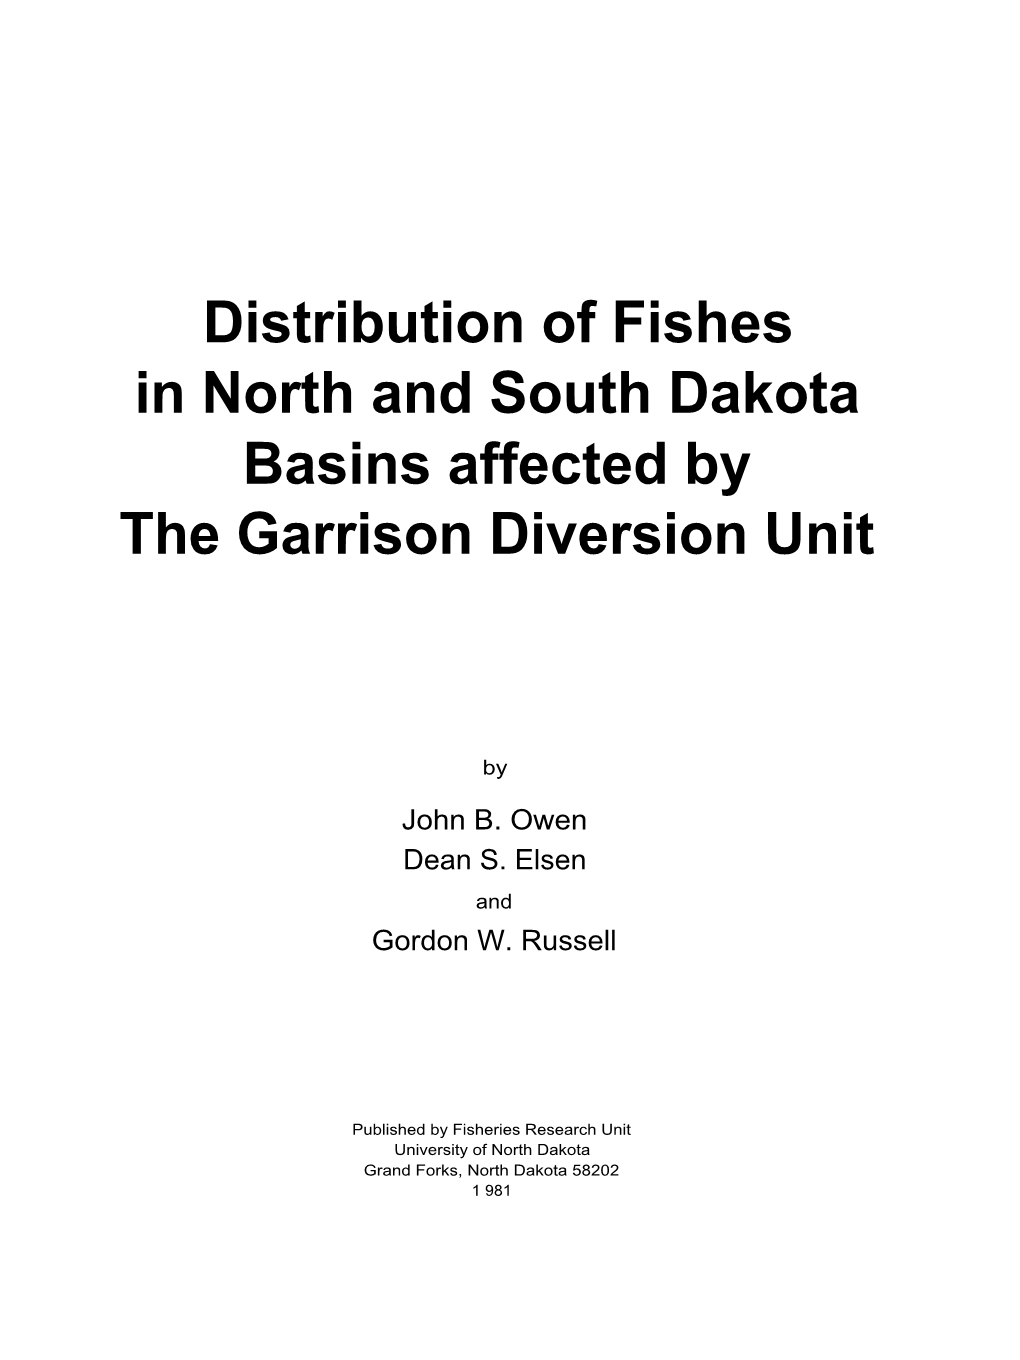 Distribution of Fishes in North and South Dakota Basins Affected by the Garrison Diversion Unit